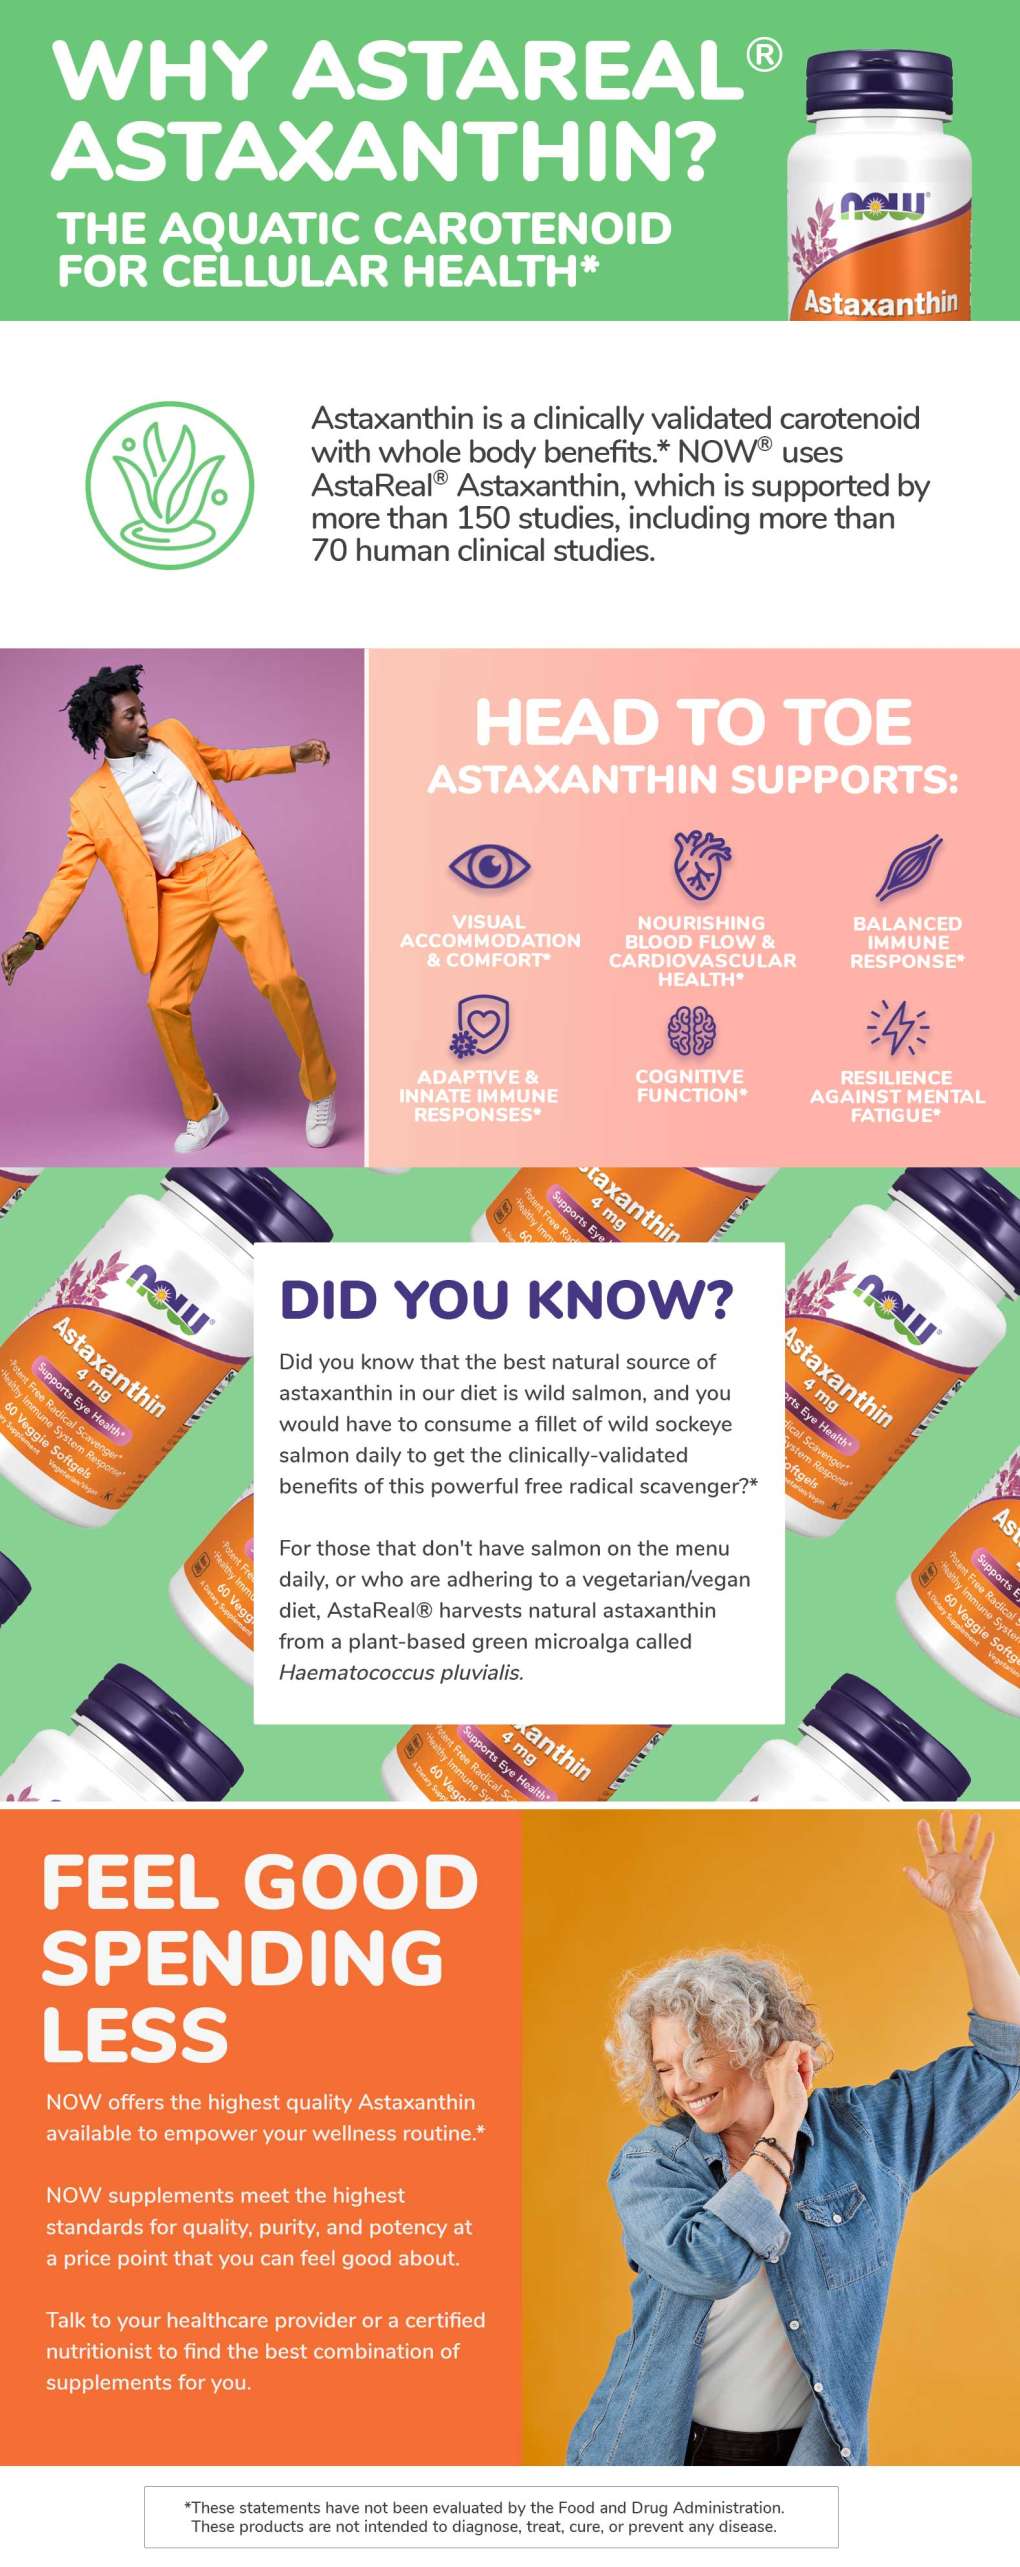 0750N_Astaxanthin-Supplements-Infographic-Update.jpg?itok\u003d01FPxpY1